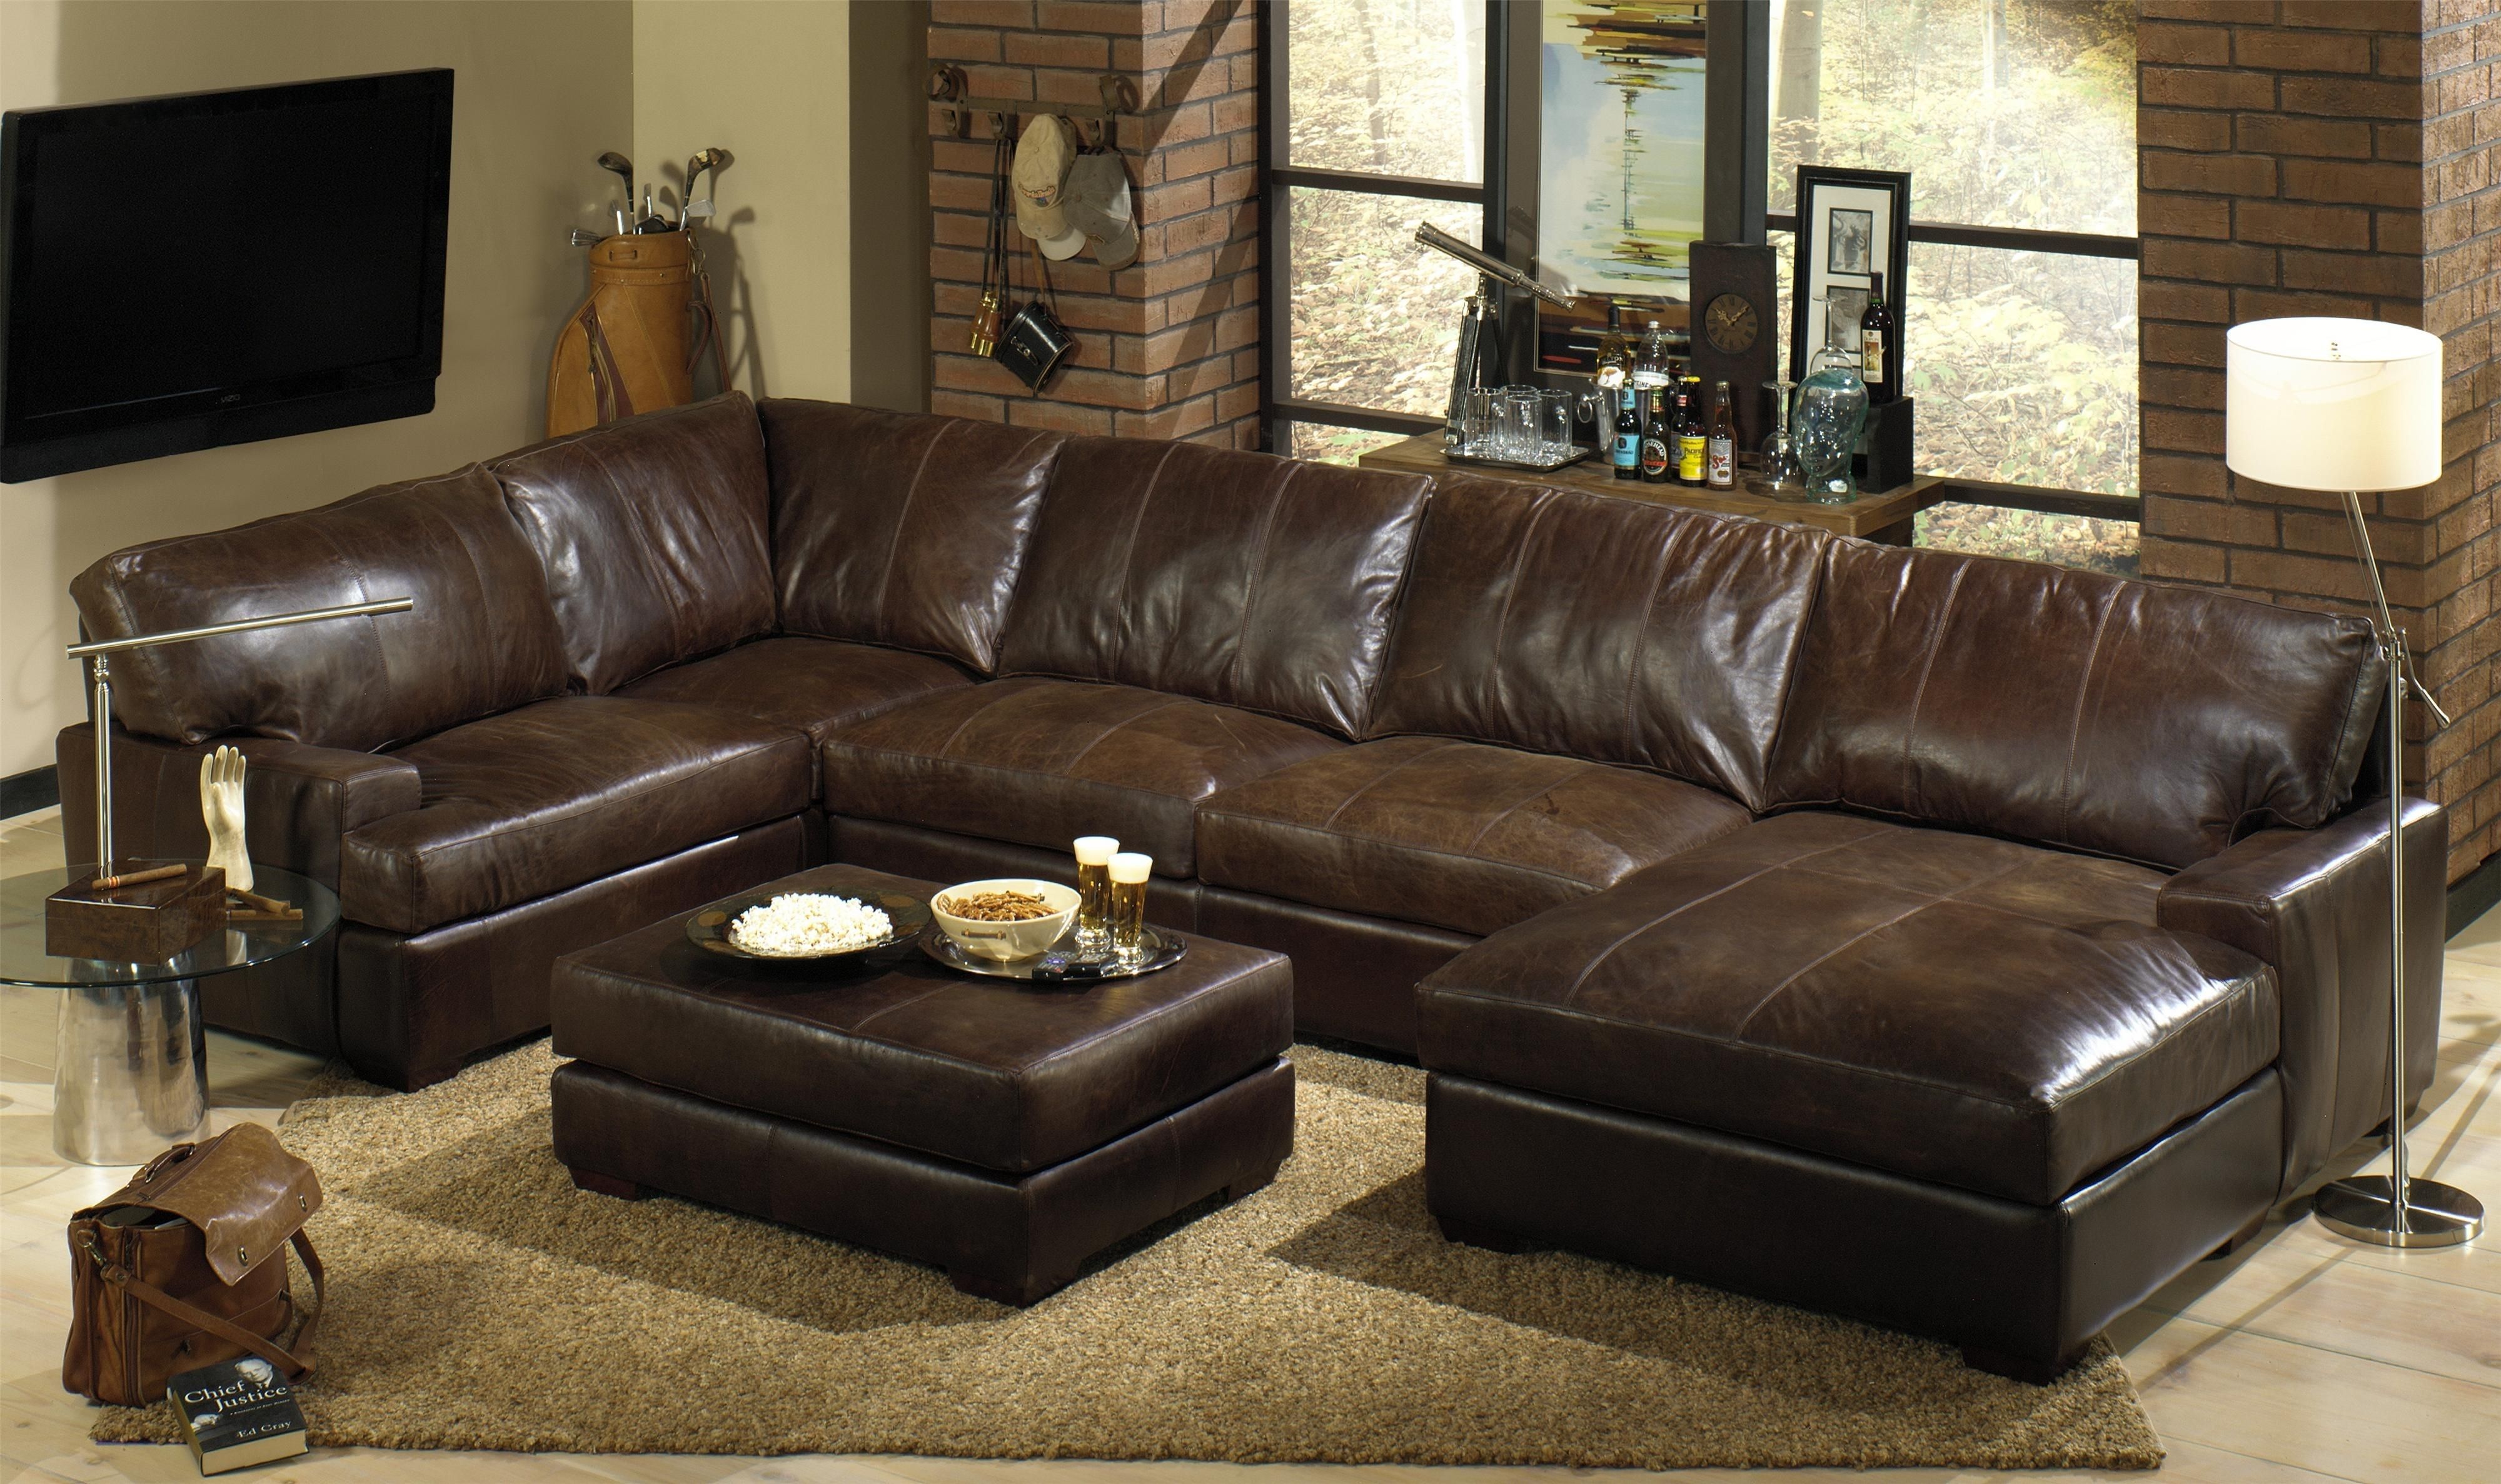 Luxury Brown Leather Sectional Sofas With Recliners 11 About Remodel Throughout Luxury Sectional Sofas (View 2 of 10)